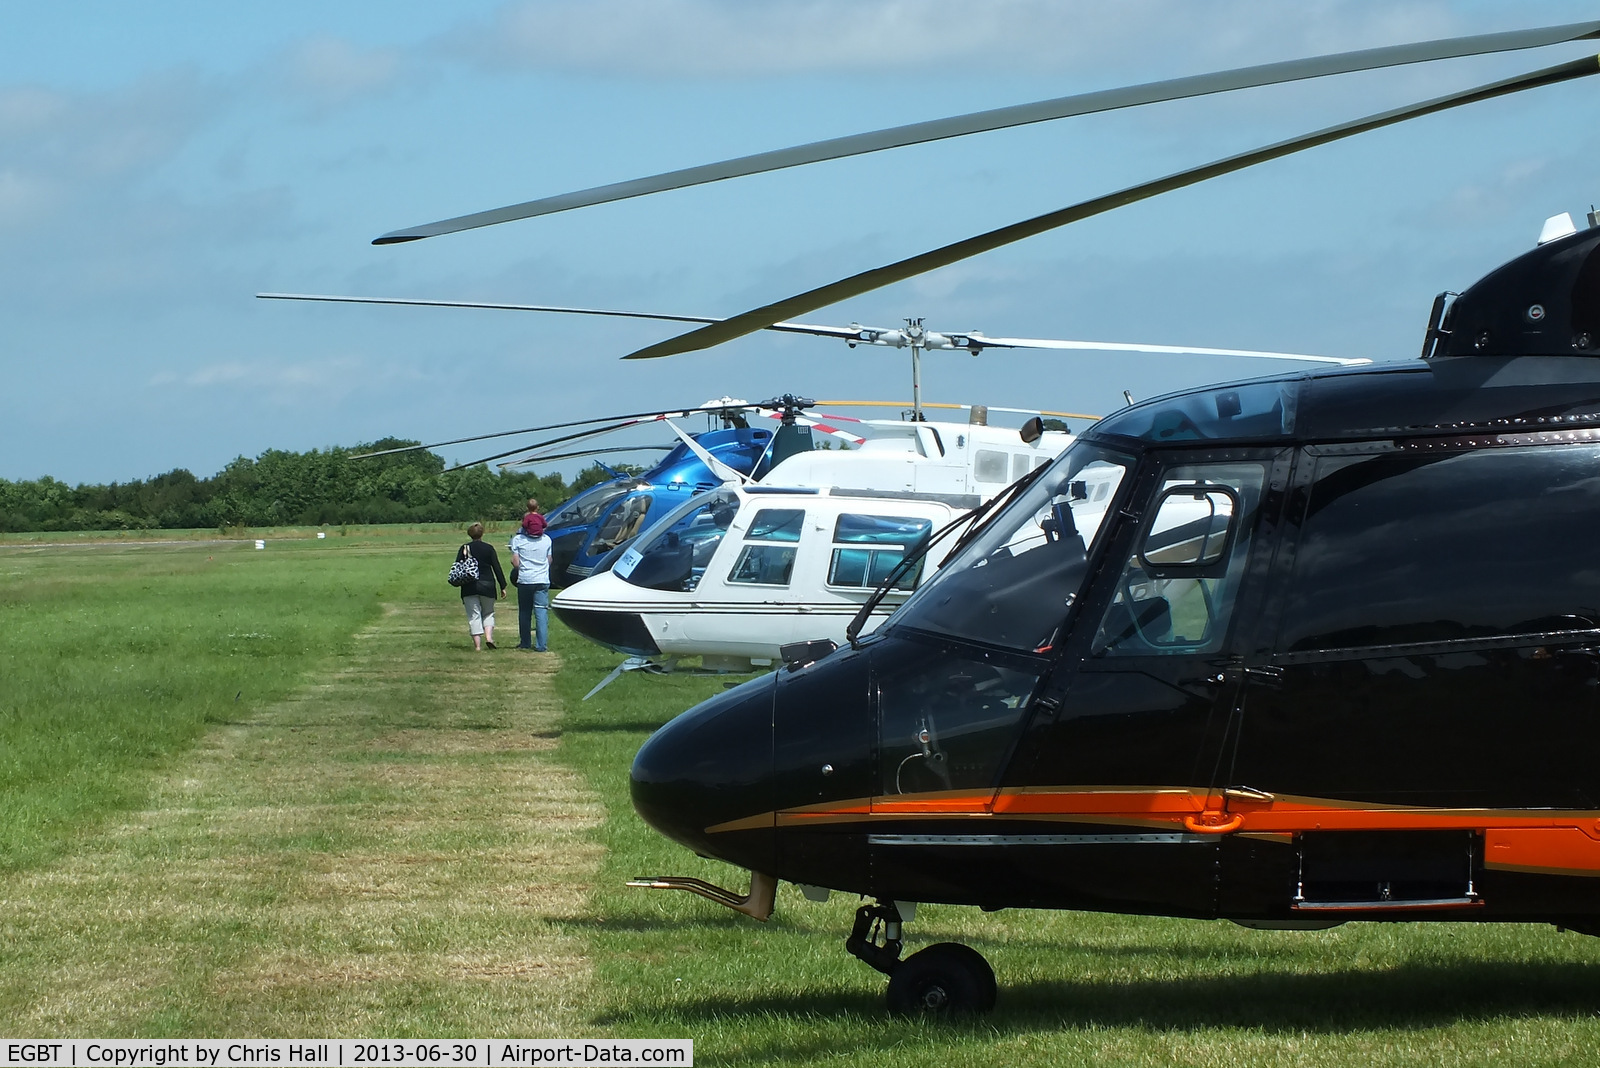 Turweston Aerodrome Airport, Turweston, England United Kingdom (EGBT) - line up of helicopters being used for ferrying race fans to the British F1 Grand Prix at Silverstone